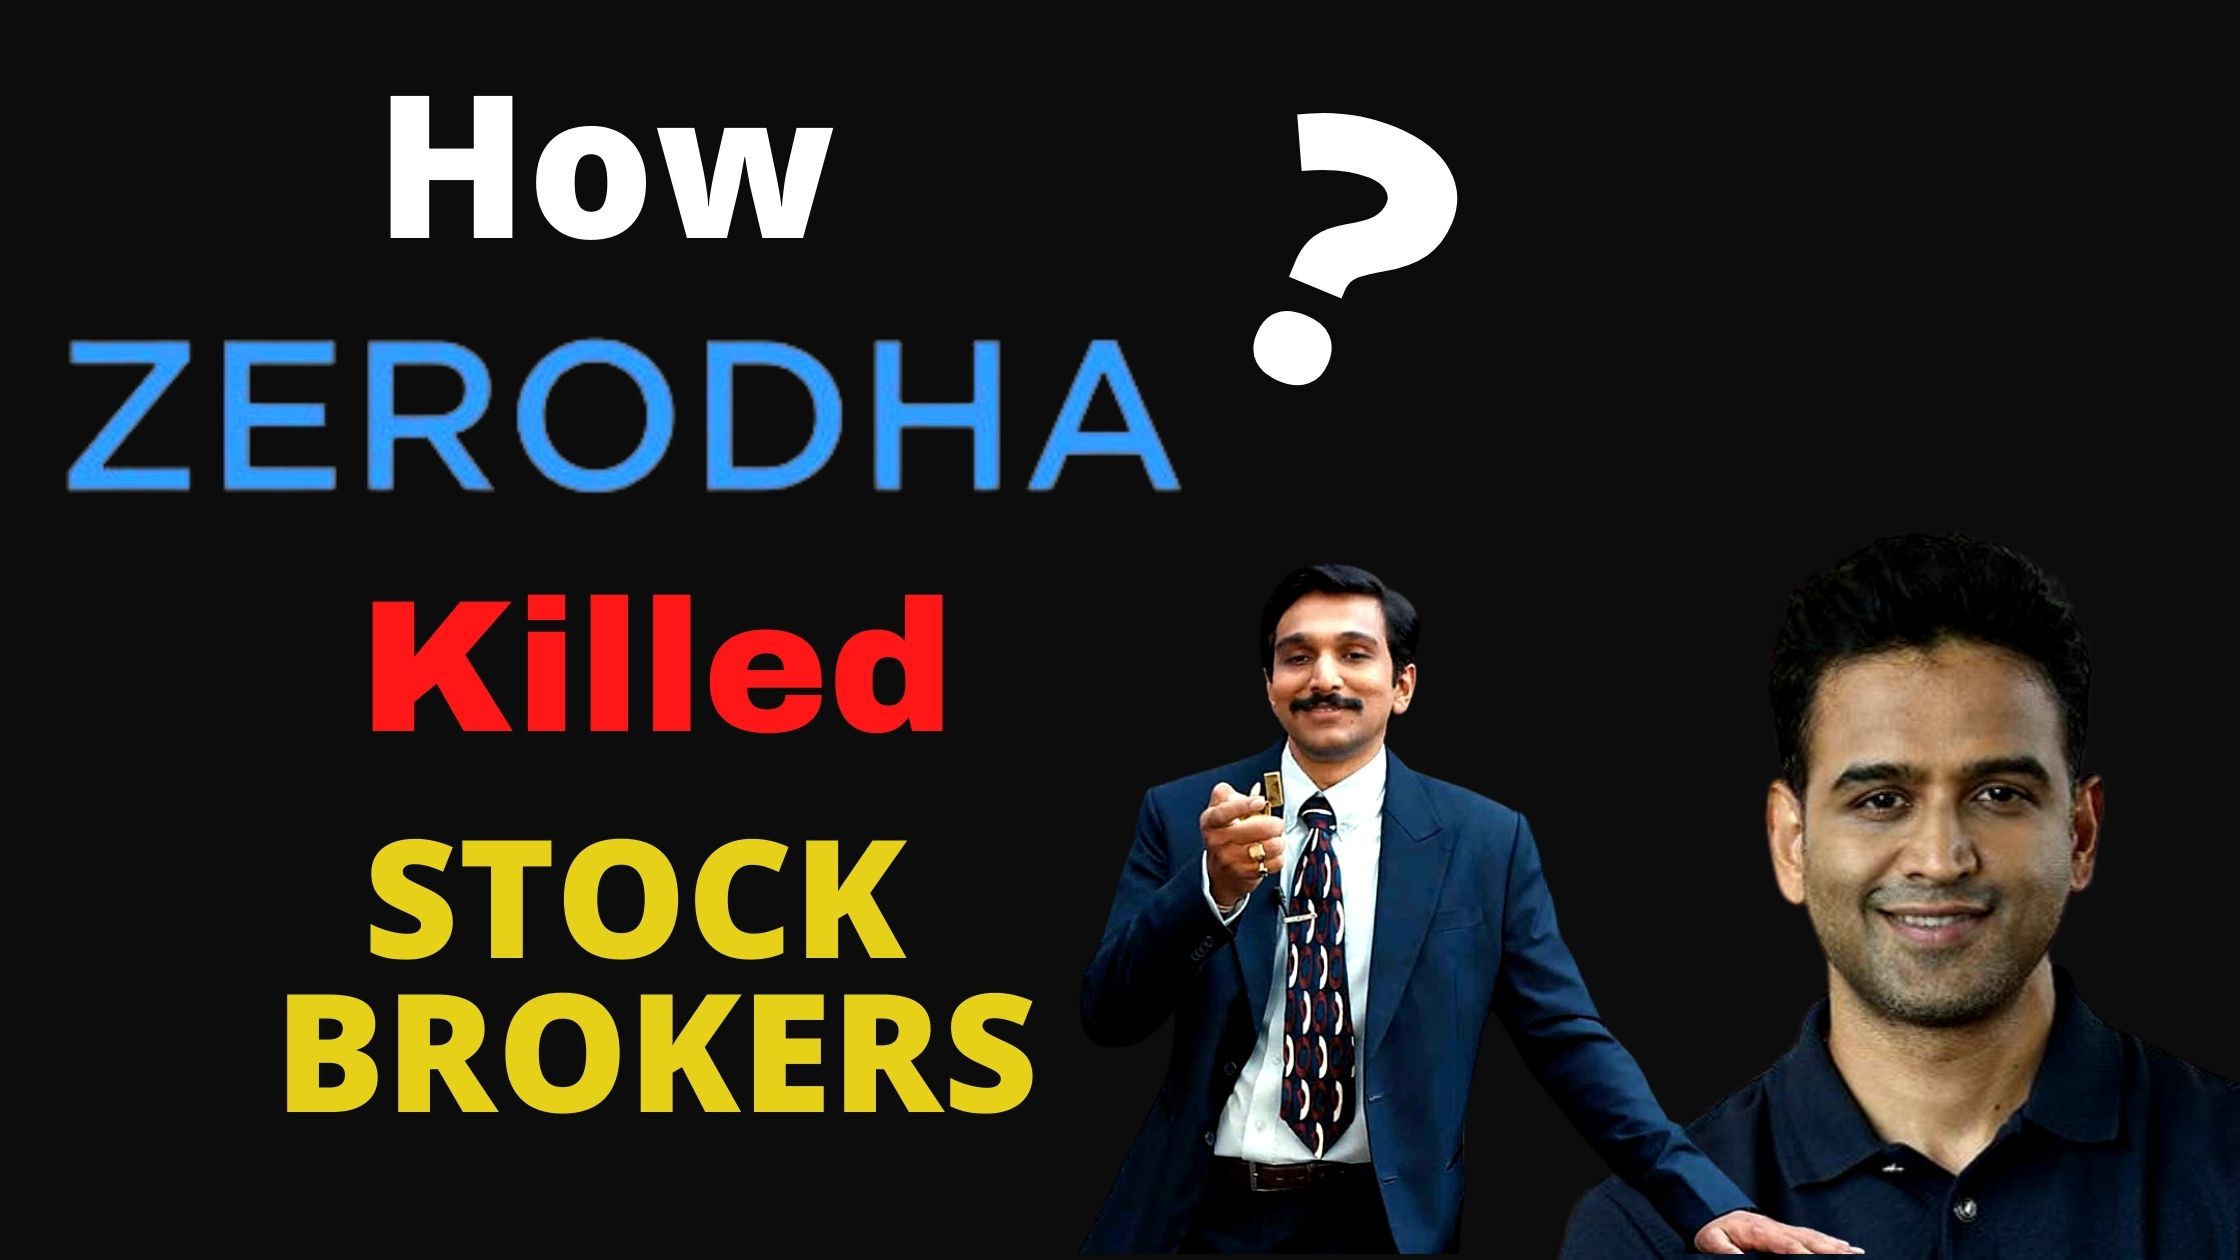 Today Zerodha's valuation is 2 Billion Dollars. With 1000 Crs revenue, In 2020 Zeodha made a profit of 440 Crs. Interestingly they didn't raise any funds or invest in marketing.        Now the question arises, In the startup world, after raising funds also companies fail then how Zerodha do this without funding? And if Zerodha is not a broking company then what is Zerodha?  HOW ZERODHA WAS STARTED? So the story starts in 2000 when Nithin Kamath - founder of Zerodha used to do a job in a call center. As his shift was of a night, he used to be free during the day. And this introduced him to TRADING. He used to trade during the day while working at night.    Till 2005, he was in the loop of trading and call centers. But then he met an NRI in a gym. When Nitin showed him his account then the NRI asked him to handle his account also. Nitin managed his account. Then time by time his 1 client turns into 10 clients.   1st STRATEGY OF ZERODHA The work was interesting but at that time something was going on the market which we all hate. That was Extreme Discrimination. It's like you go in a shop with tattered clothes and ask the shopkeeper How much for this shirt? Then the shopkeeper says 500 Rs only. But if a man wearing a suit and enters the shop and asks how much for this shirt? then the shopkeeper says 5000 Rs only.    You won't believe, in olden times this used to happen in the stock market. When people used to go to a broker to open a Demat account, he used to say some certain brokerage. But if someone says that I want to make this much turnover then brokerage was different. That means different brokerage to different people. And from here Zerodha started. So during the initial days,    Zerodha made a brokerage calculator in an excel sheet and gave it to their clients. So from this clients used to understand that if they buy a stock at a certain price and at another certain price sell then what brokerage do they have to give to Zerodha. So Zerodha made transparency possible for their clients.    Slowly people started liking this transparency. But the journey was long for Zerodha. Between 2010-2011, during the initial year, Zerodha only had 1000 customers. But now the question arises, after transparency also Why people were not showing interest in the stock market? And then Nithin realized nothing much is going to happen with low cost and transparency.   2nd STRATEGY OF ZERODHA  Zerodha shifted from Low-Cost Model to Flat Free Model. If you trade or invest, invest 1000 rupees or for 1 crore rupees, Zerodha will only charge 20 Rs/person. But then enters a competitor in the market. Like Zerodha it also provided low-cost and transparency to clients. And all of a sudden Zerodha lost its edge. At that time Nithin Kamath used to write a blog post, where Zerodha used to provide free finance and stock knowledge.    By this Nithin realized that 90% of people in the market are investors not traders. There is a lot of difference in the psychology of traders and investors. 90% of people in the market are those who invest in the stock market for the long term. But Zerodha was only focusing on the traders' community. And then Zerodha took a step that made a huge impact on the stock market industry.    Zerodha turns its 20 Rs flat fee to 0 Rs. Now Zerodha only used to charge 20 Rs on intraday and Futures and Options. This one move from Zerodha not only attracted investing community but also made many stockbrokers jobless. You won't believe people started calling brokers "Robbers".    Zerodha's this business strategy made a bragworthy proposition in the market and investors started recommending Zerodha to others.    But shockingly, after this impactful move, Zerodha's growth rate was not much till 2016. The reason behind this was Complex Procedure.   3rd STRATEGY OF ZERODHA let me tell you People don't make good decisions they make convenient decisions. It's a human tendency that people choose easy things. And this is why people were not showing interest in Zerodha and the stock market. If you open any old stock trading platform you will become dizzy. Things were so complex that people didn't even think about investing in the stock market. And due to this Zerodha made its Kite Platform.   The people who have used Kite know that a person who doesn't know S of the stock market can easily use this. And after the launch of this platform Zerodha's growth was on the next level and today their profit is 440 Crs. But if Zerodha didn't notice these things then it won't be that successful.    CONSUMER DECISION-MAKING PROCESS   For every business, it is important to know how their consumers make decisions.  And Zerodha did it perfectly. They noticed how their consumers/clients make decisions on investing in the stock market. And is important for any business to make its consumer's decision-making easy and simple. And this creates a bragworthy proposition.    The bragworthy decision means to create that value in the market that your consumer recommends to others.    IDEA TO EXECUTION ROADMAP   The idea is not valuable if not properly executed. Many startups have amazing ideas but no execution roadmap. Due to this, their idea fails.    Zerodha is an example that was raised without any funding. But many of us fail because of not getting the right guidance. NO proper mentorship nor proper roadmap to execute ideas.     How Zerodha Killed Stock Brokers ?  | Business Case Study      BUILD AN IRREVERSIBLE CHANGE   If your product can change the behavior of customers then they will never go to old products. In older times, if you had a prepaid sim, to recharge it you need to go to the shop, pay him and then recharge your phone. Tell me how many of you still do it? Maybe someone only goes and recharges like this. Because our behavior is changed by companies like Paytm and PhonePe by making online recharge possible. And this change Zerodha brought in the stockbroking industry.    Zerodha is not a stock broking company then what is Zerodha? Well, Zerodha is a change-maker in the Indian Economy. If Zerodha was not there many people would not be investing in the stock market.  Credit - Aditya Saini